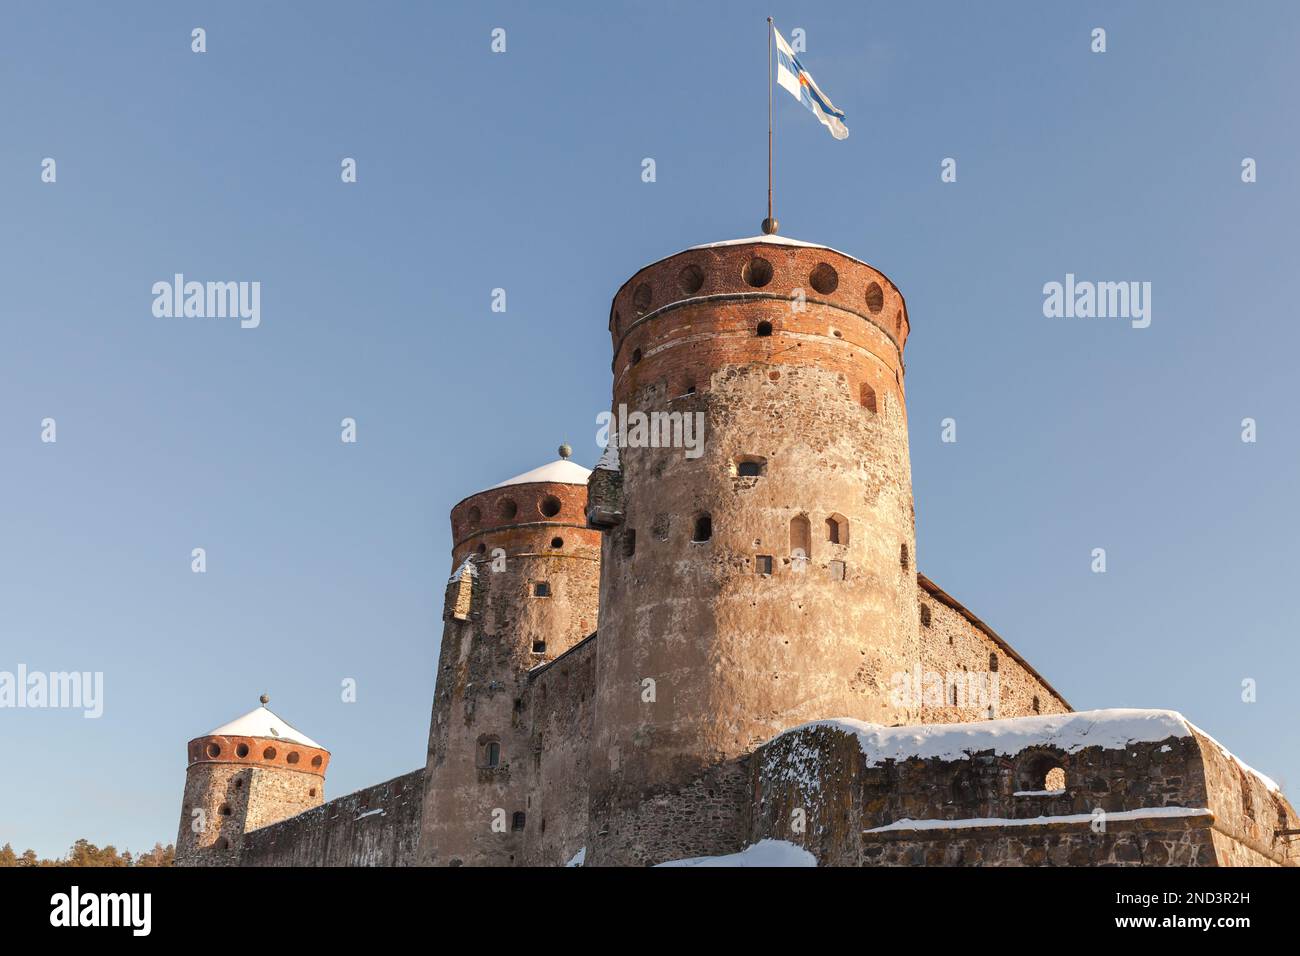 Olavinlinna is under blue sky on a sunny winter day. It is a 15th-century three-tower castle located in Savonlinna, Finland. The fortress was founded Stock Photo